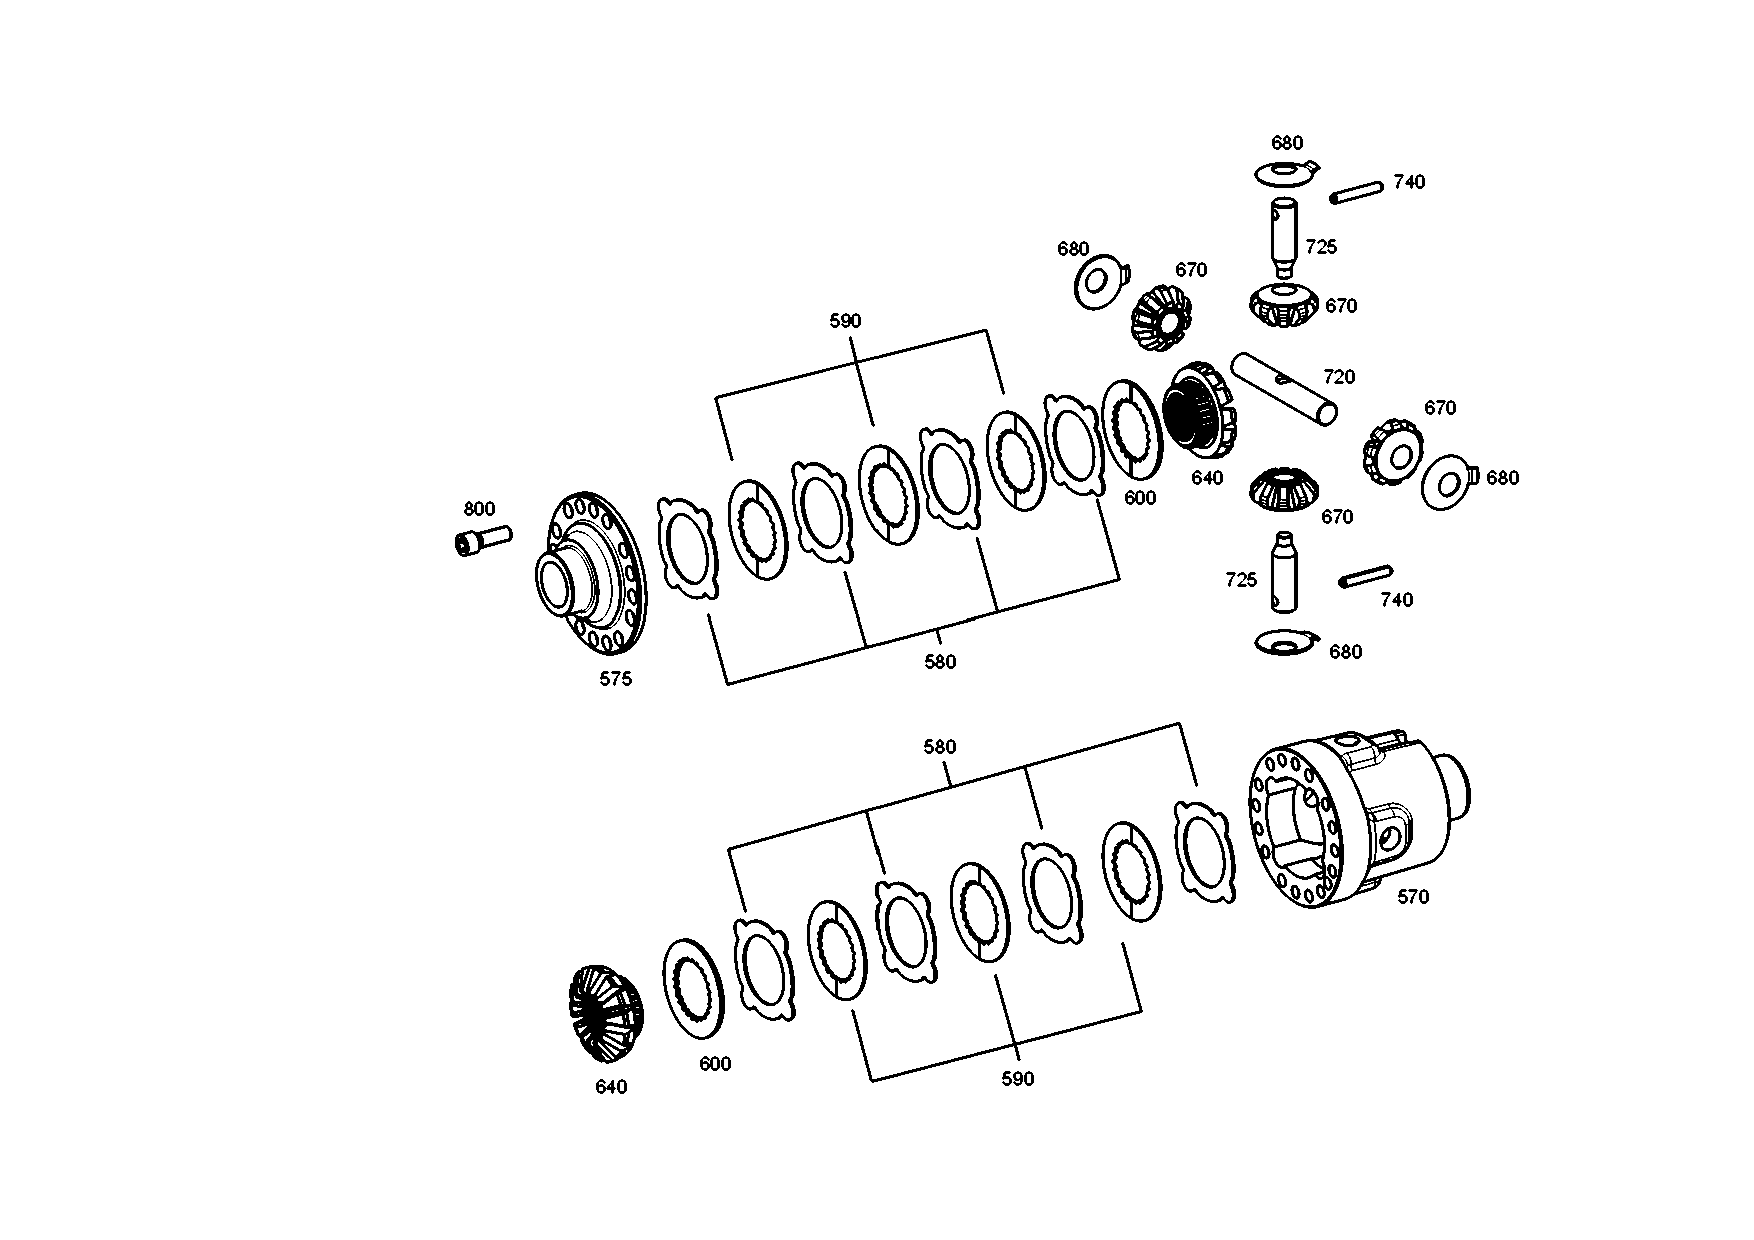 drawing for AGCO F743300021820 - END DISC (figure 2)